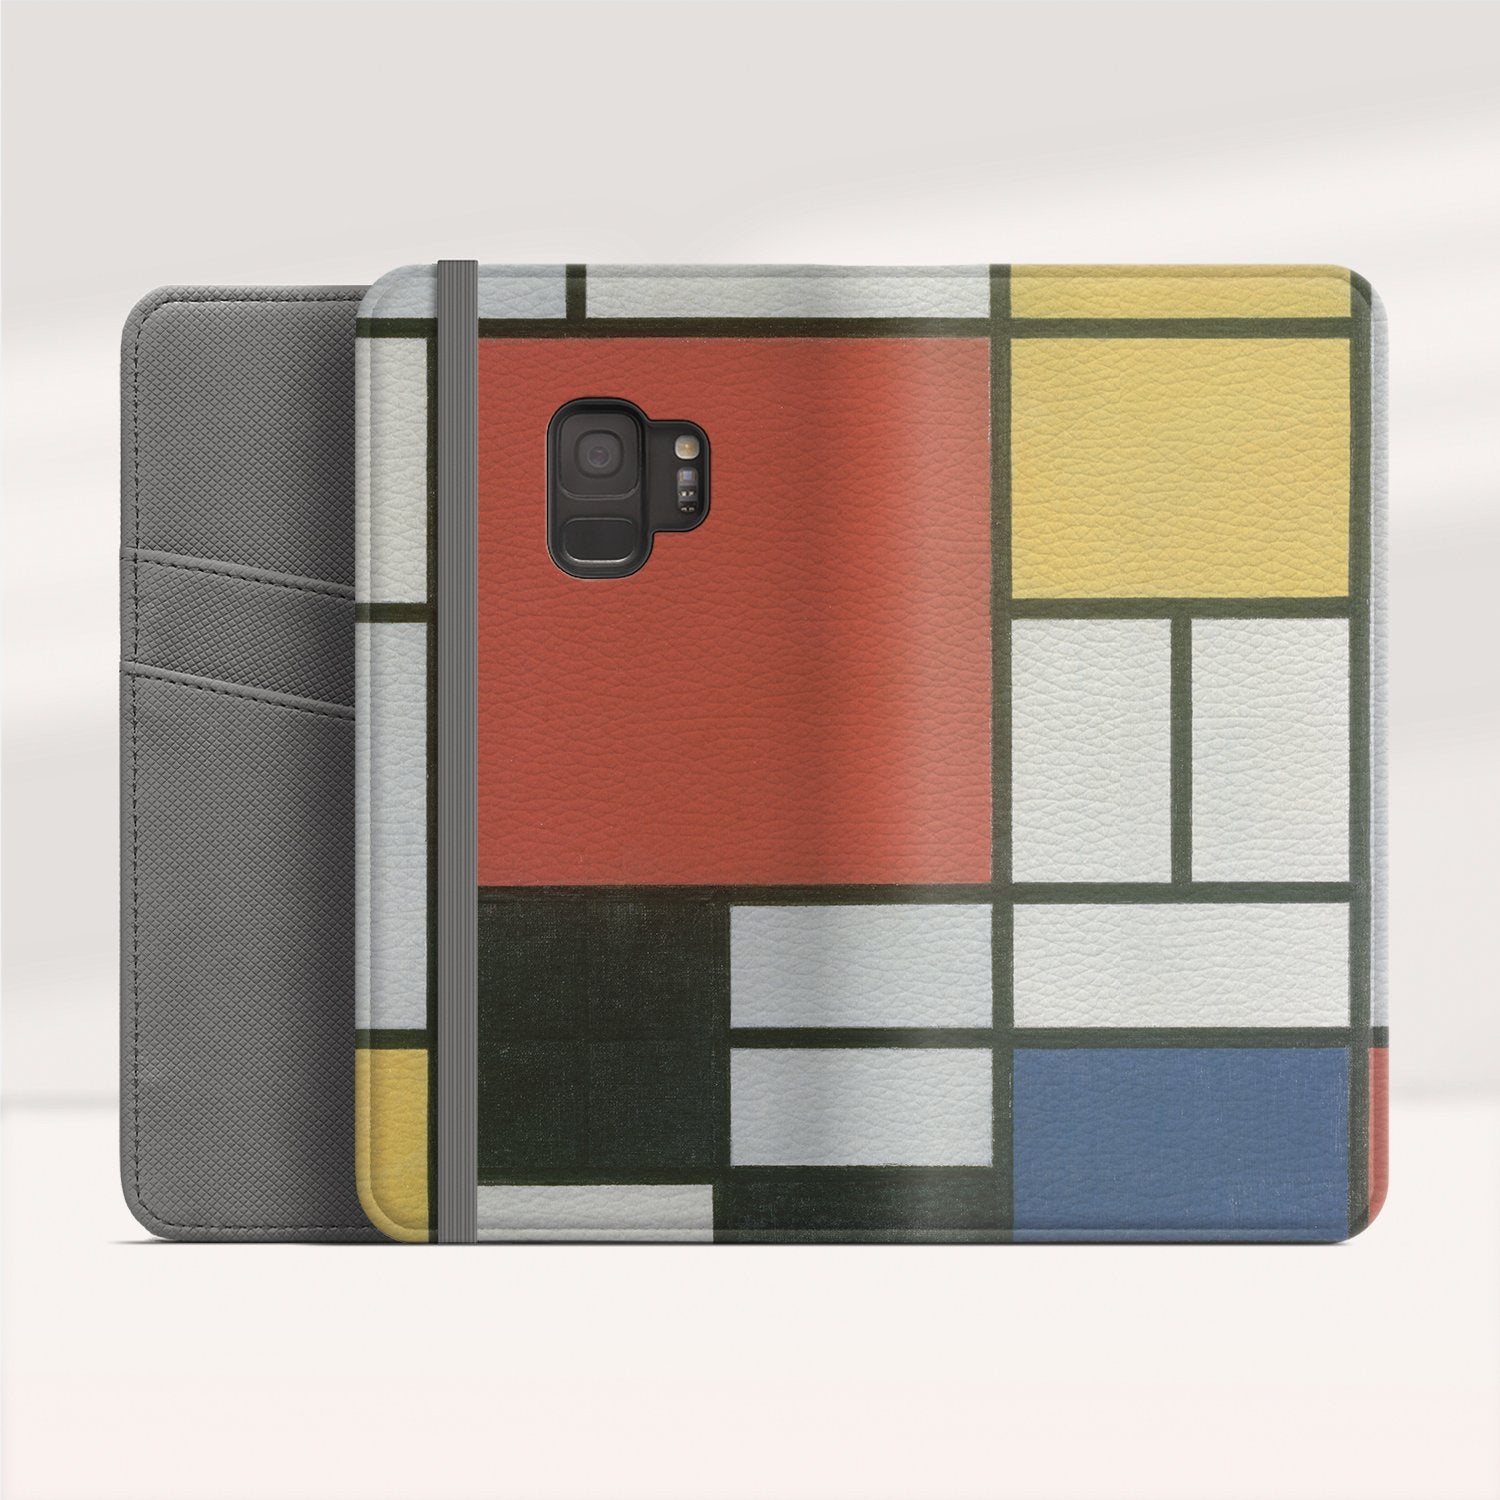 Langt væk svulst forråde Composition with Large Red Plane, Yellow, Black, Gray, and Blue by Piet  Mondrian - Samsung Wallet Cases | ArtPointOne